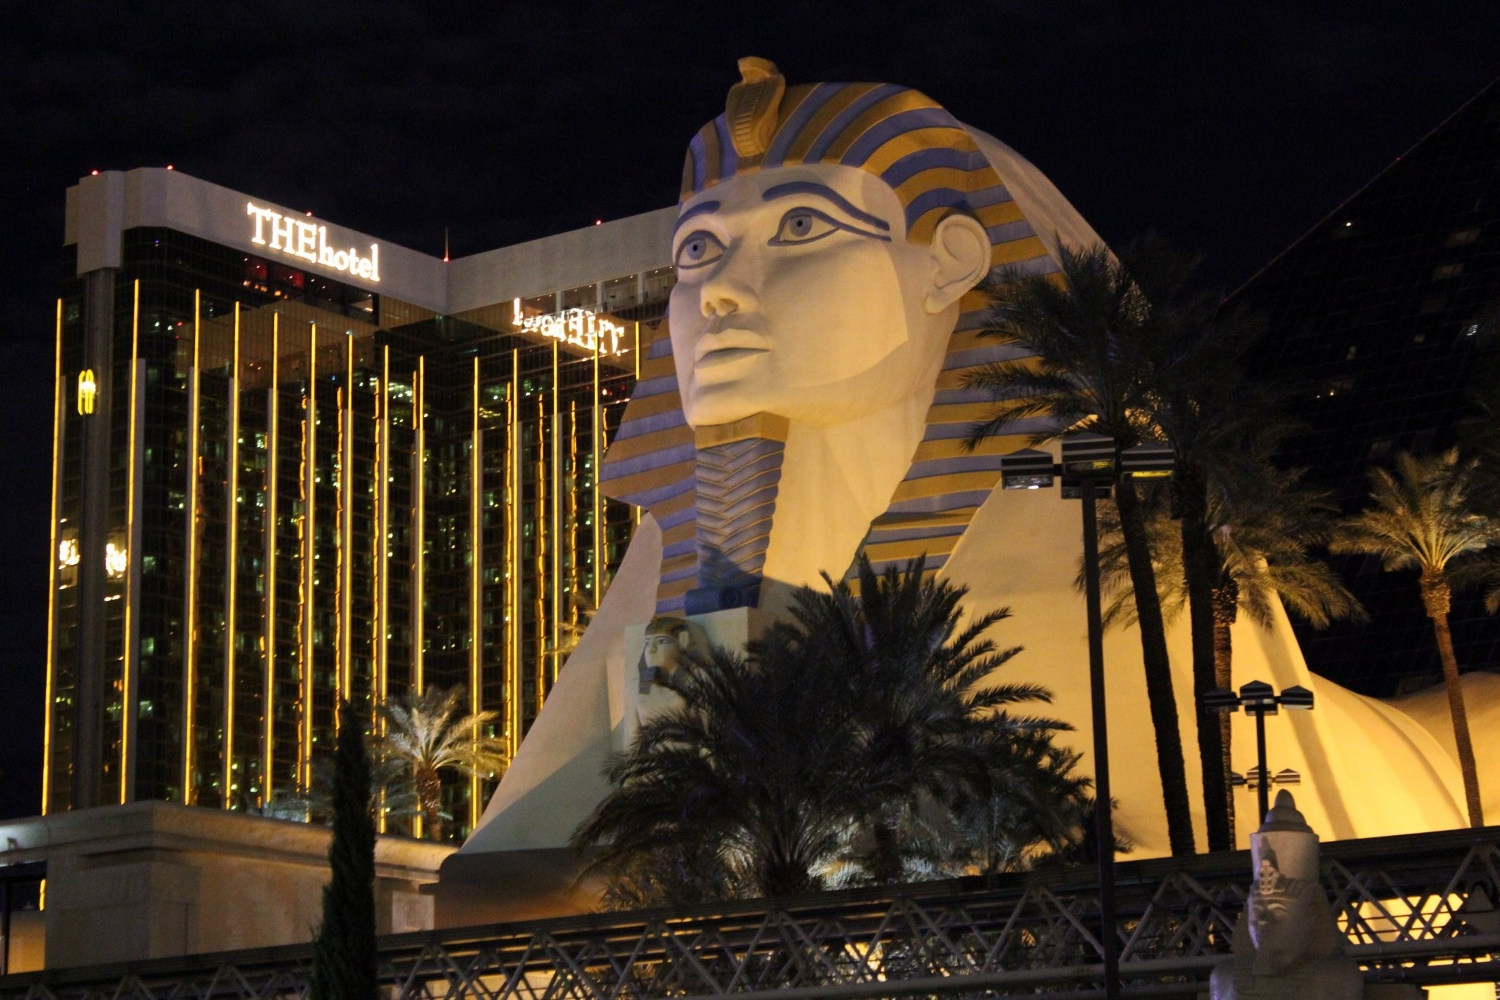 The Luxor Hotel from Las Vegas Seen at Night - the sphynx